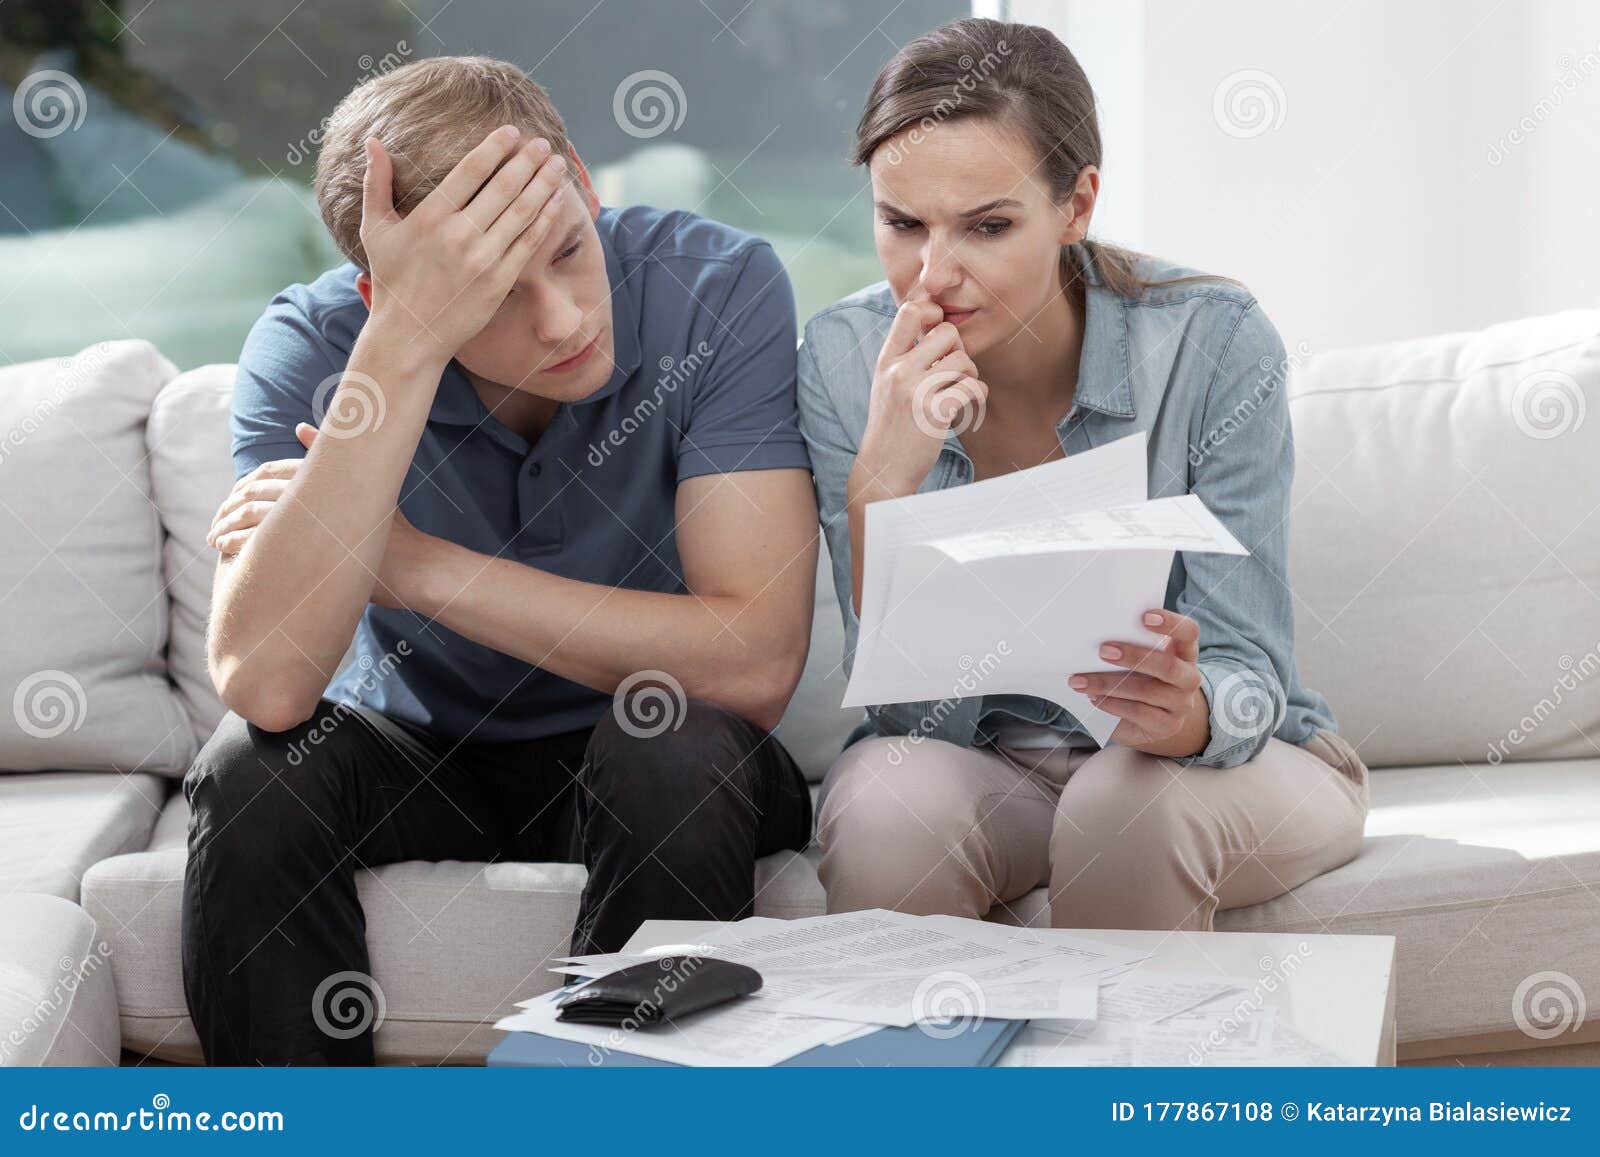 married couple looking frustrated, having no money to pay off their debts, managing family budget together